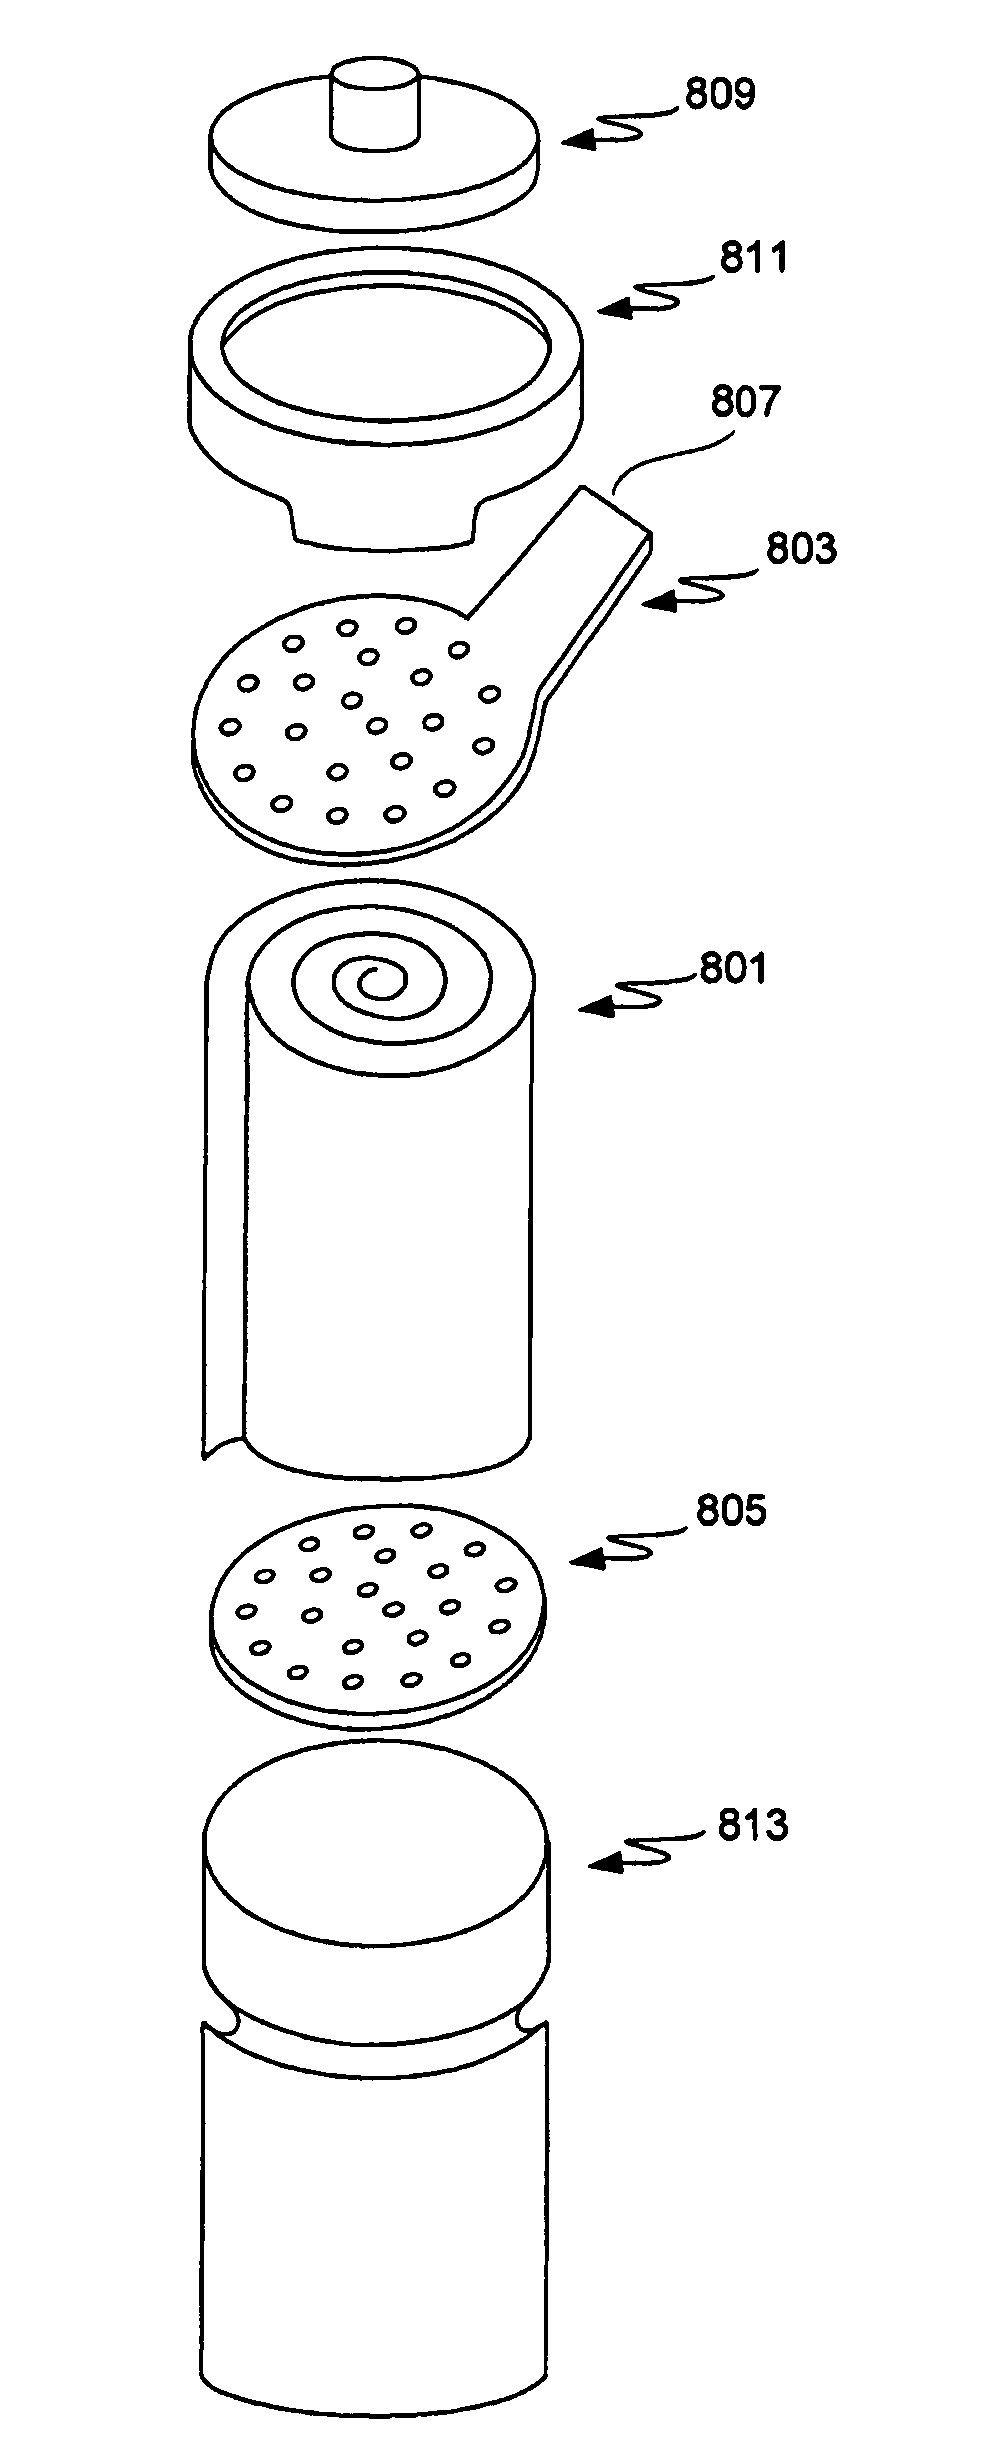 Pasted nickel hydroxide electrode for rechargeable nickel-zinc batteries